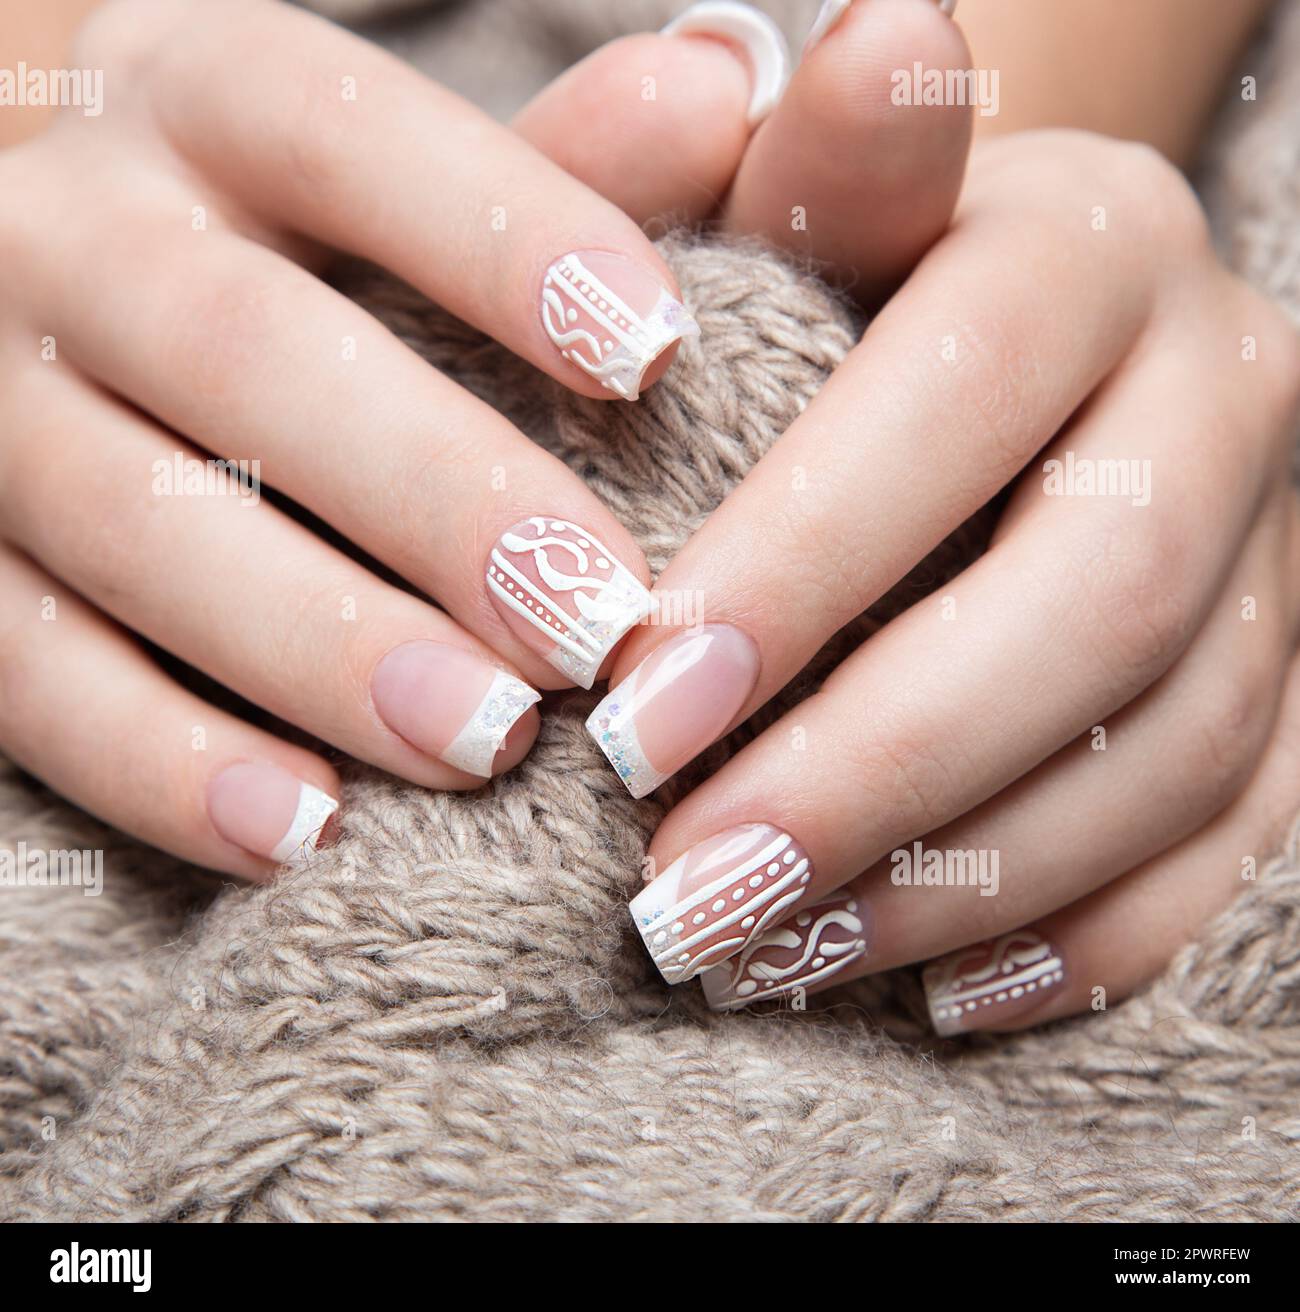 40 Cute Winter Nails Design You Will Love 2023 | Winter nails, Gel nails,  Stylish nails